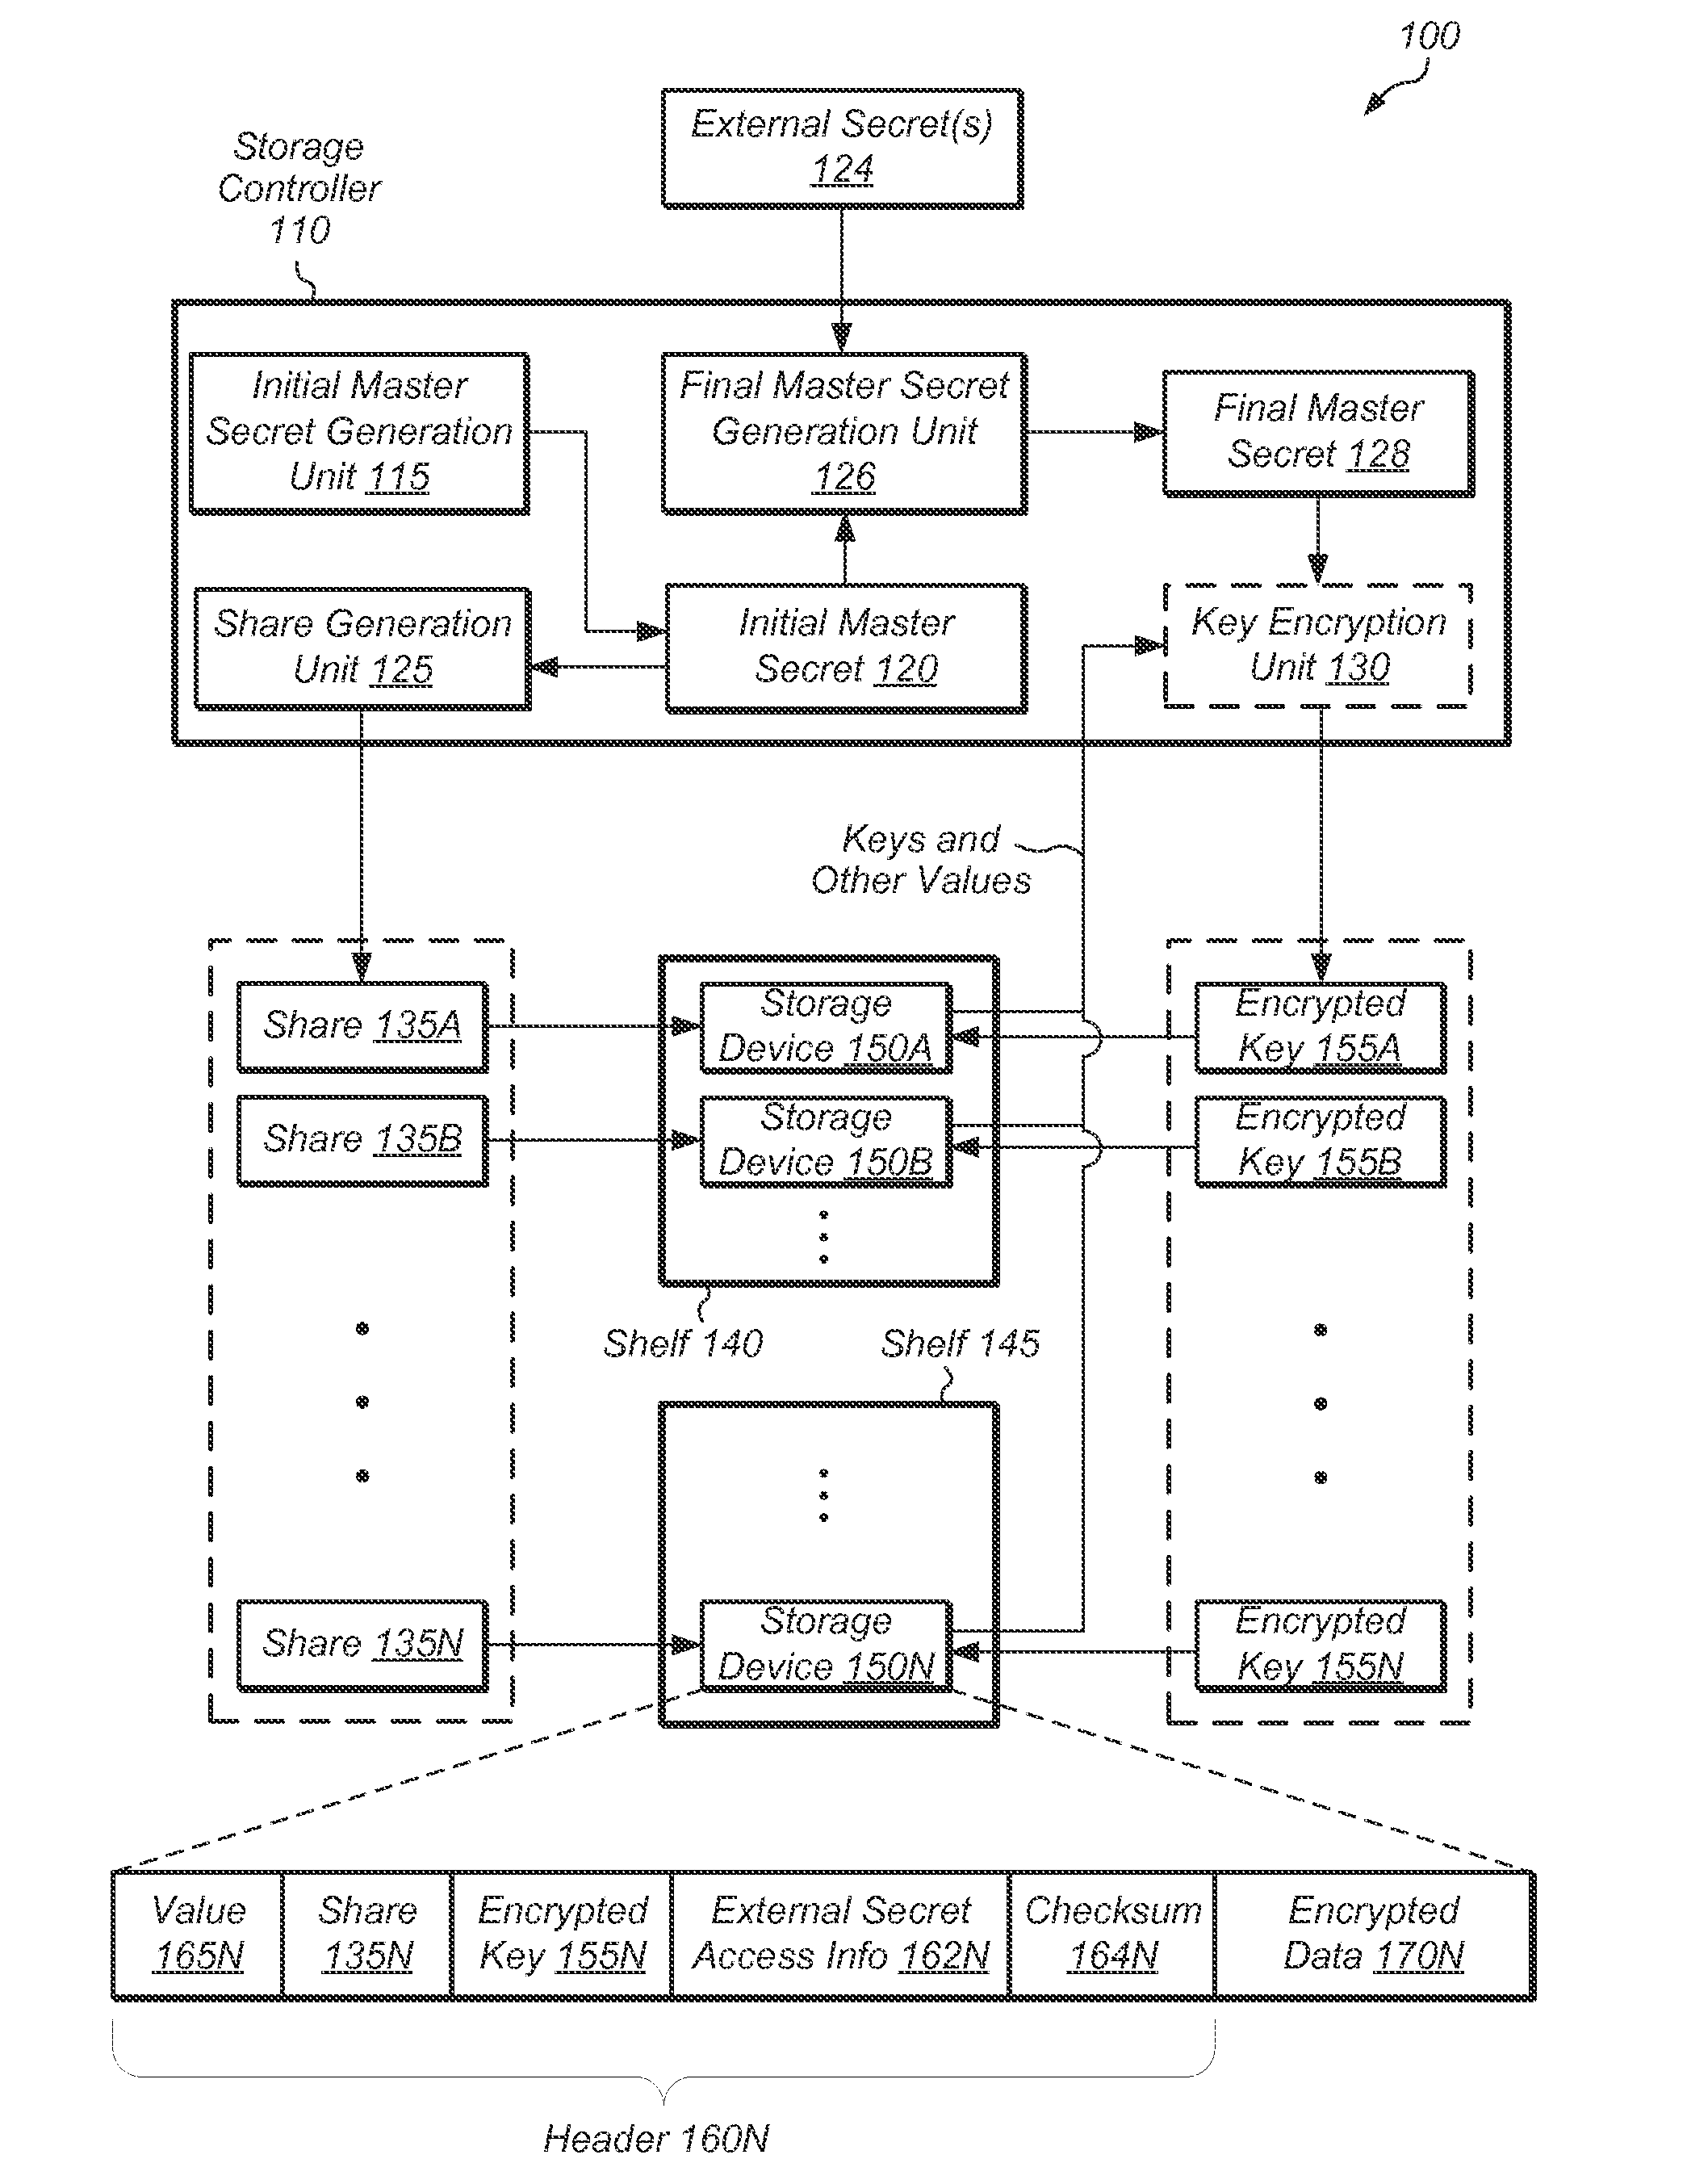 Data protection in a storage system using external secrets